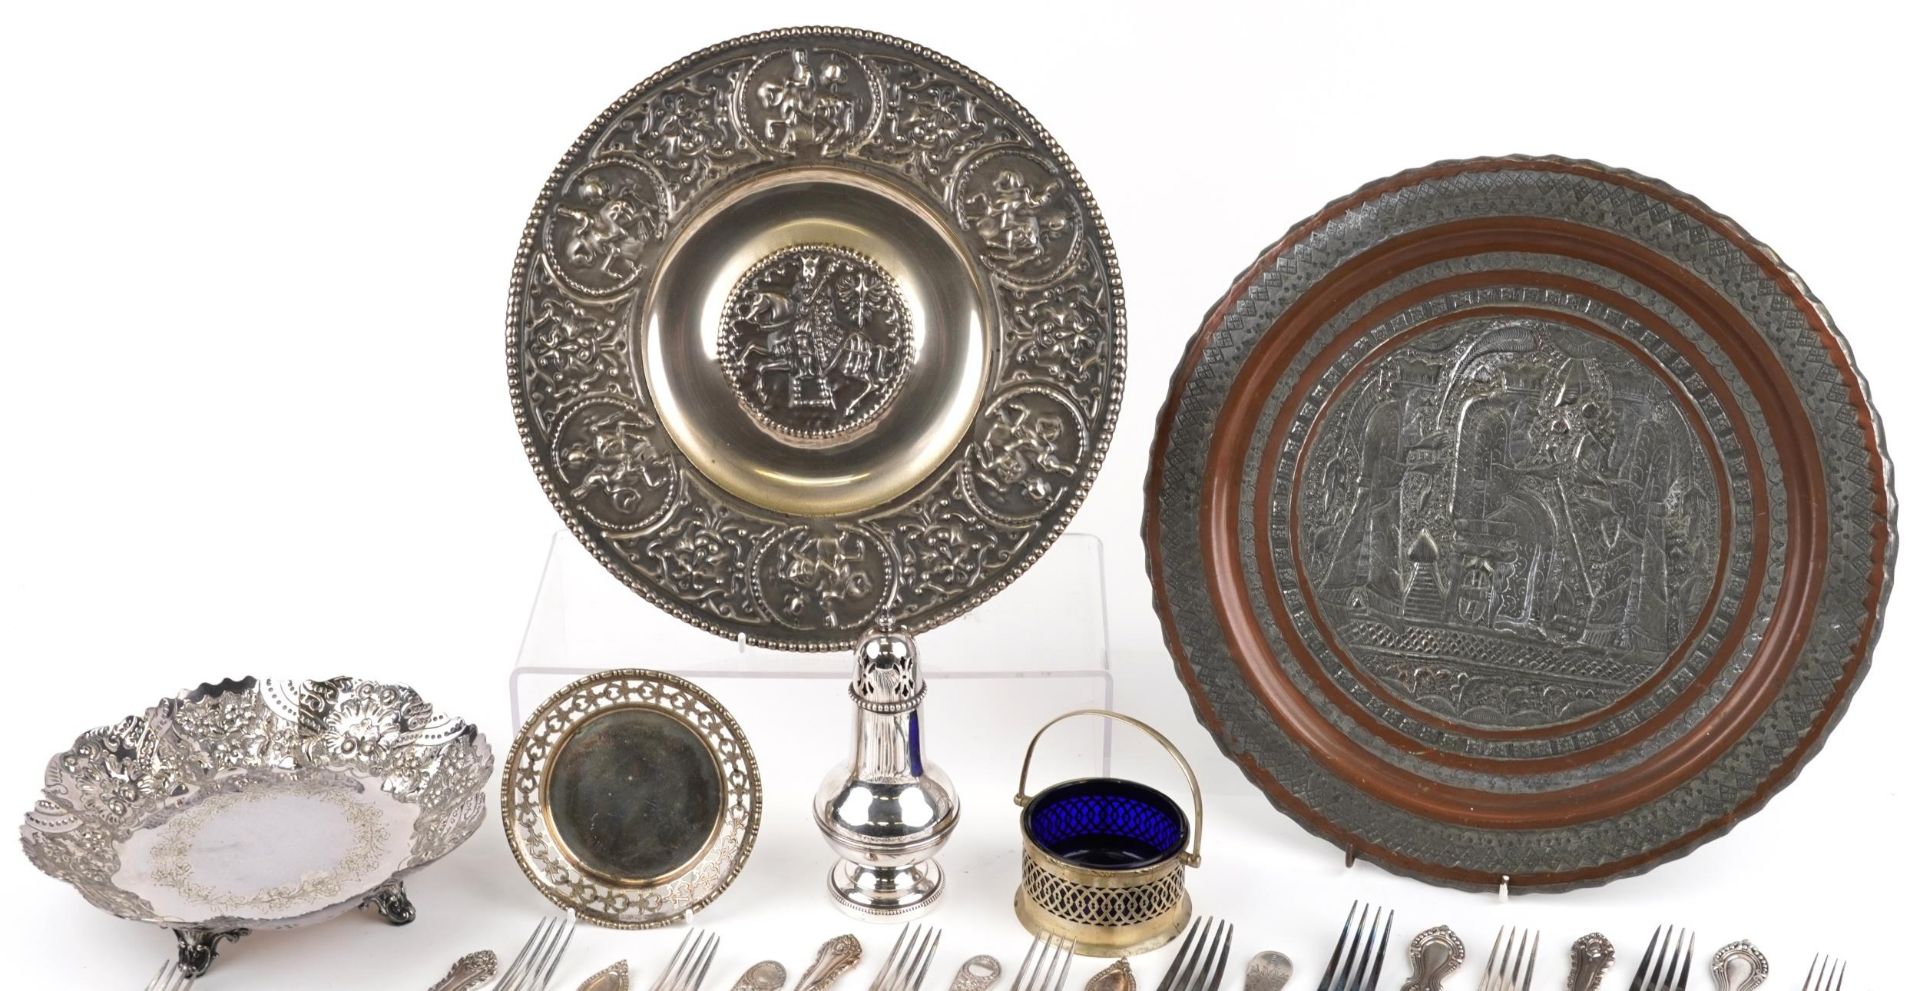 19th century and later metalware including aesthetic flatware by John Dixon & Sons and Middle - Image 2 of 3